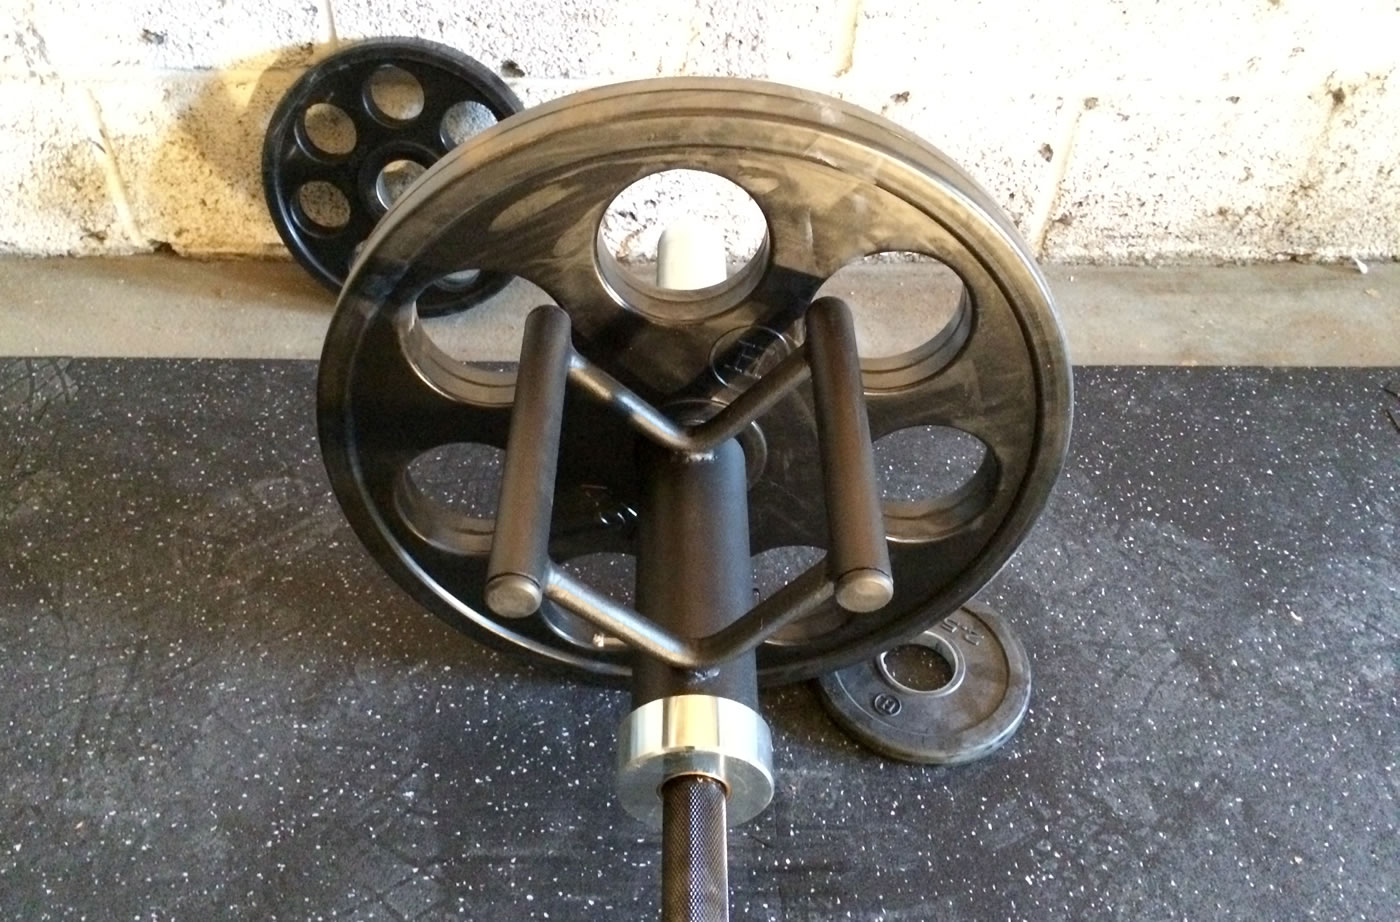 Home gym - CFF landmine double d olympic bar rowing attachment.